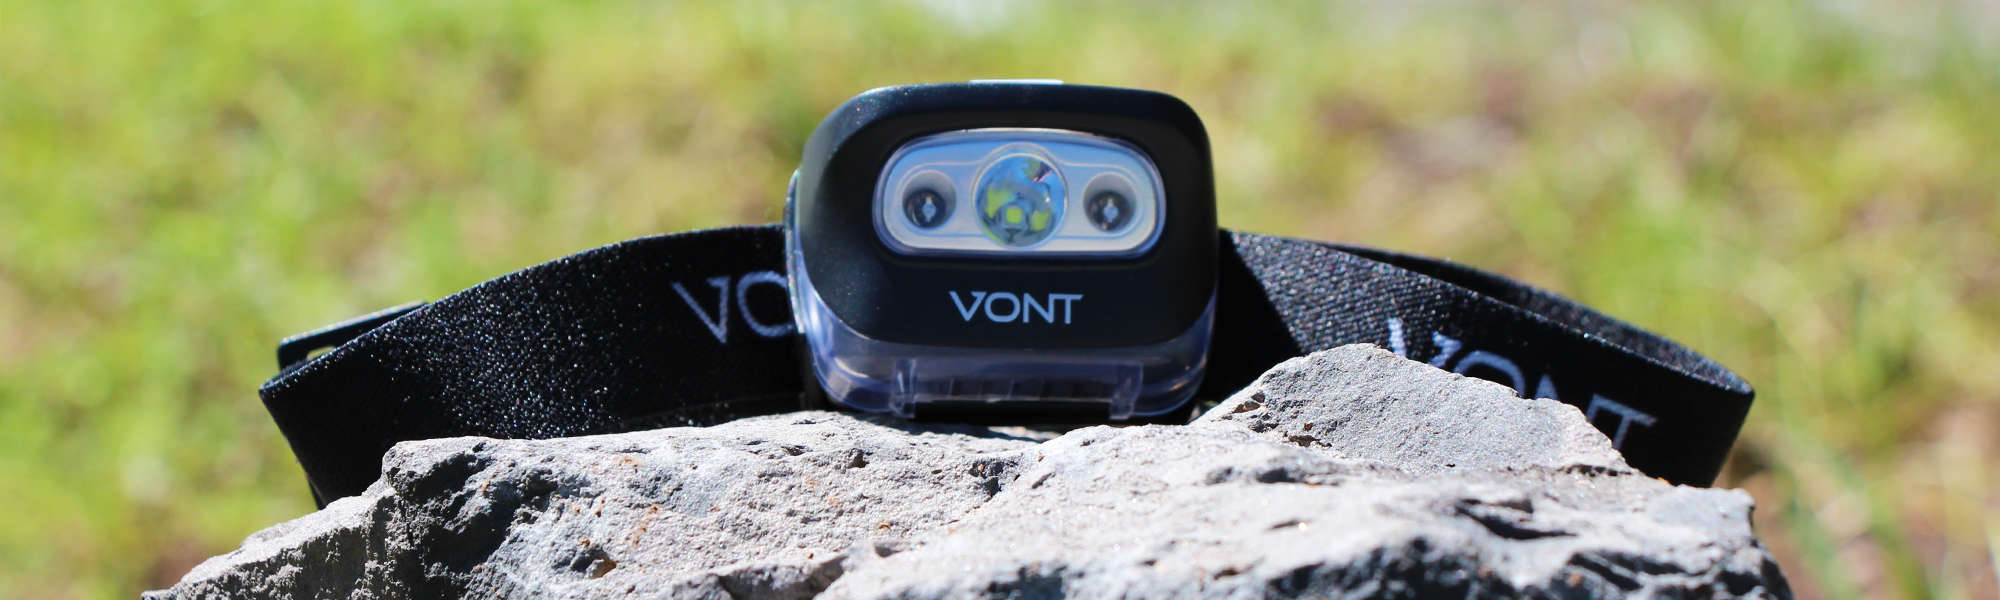 Review Of The Vont Spark LED Headlamp 2021